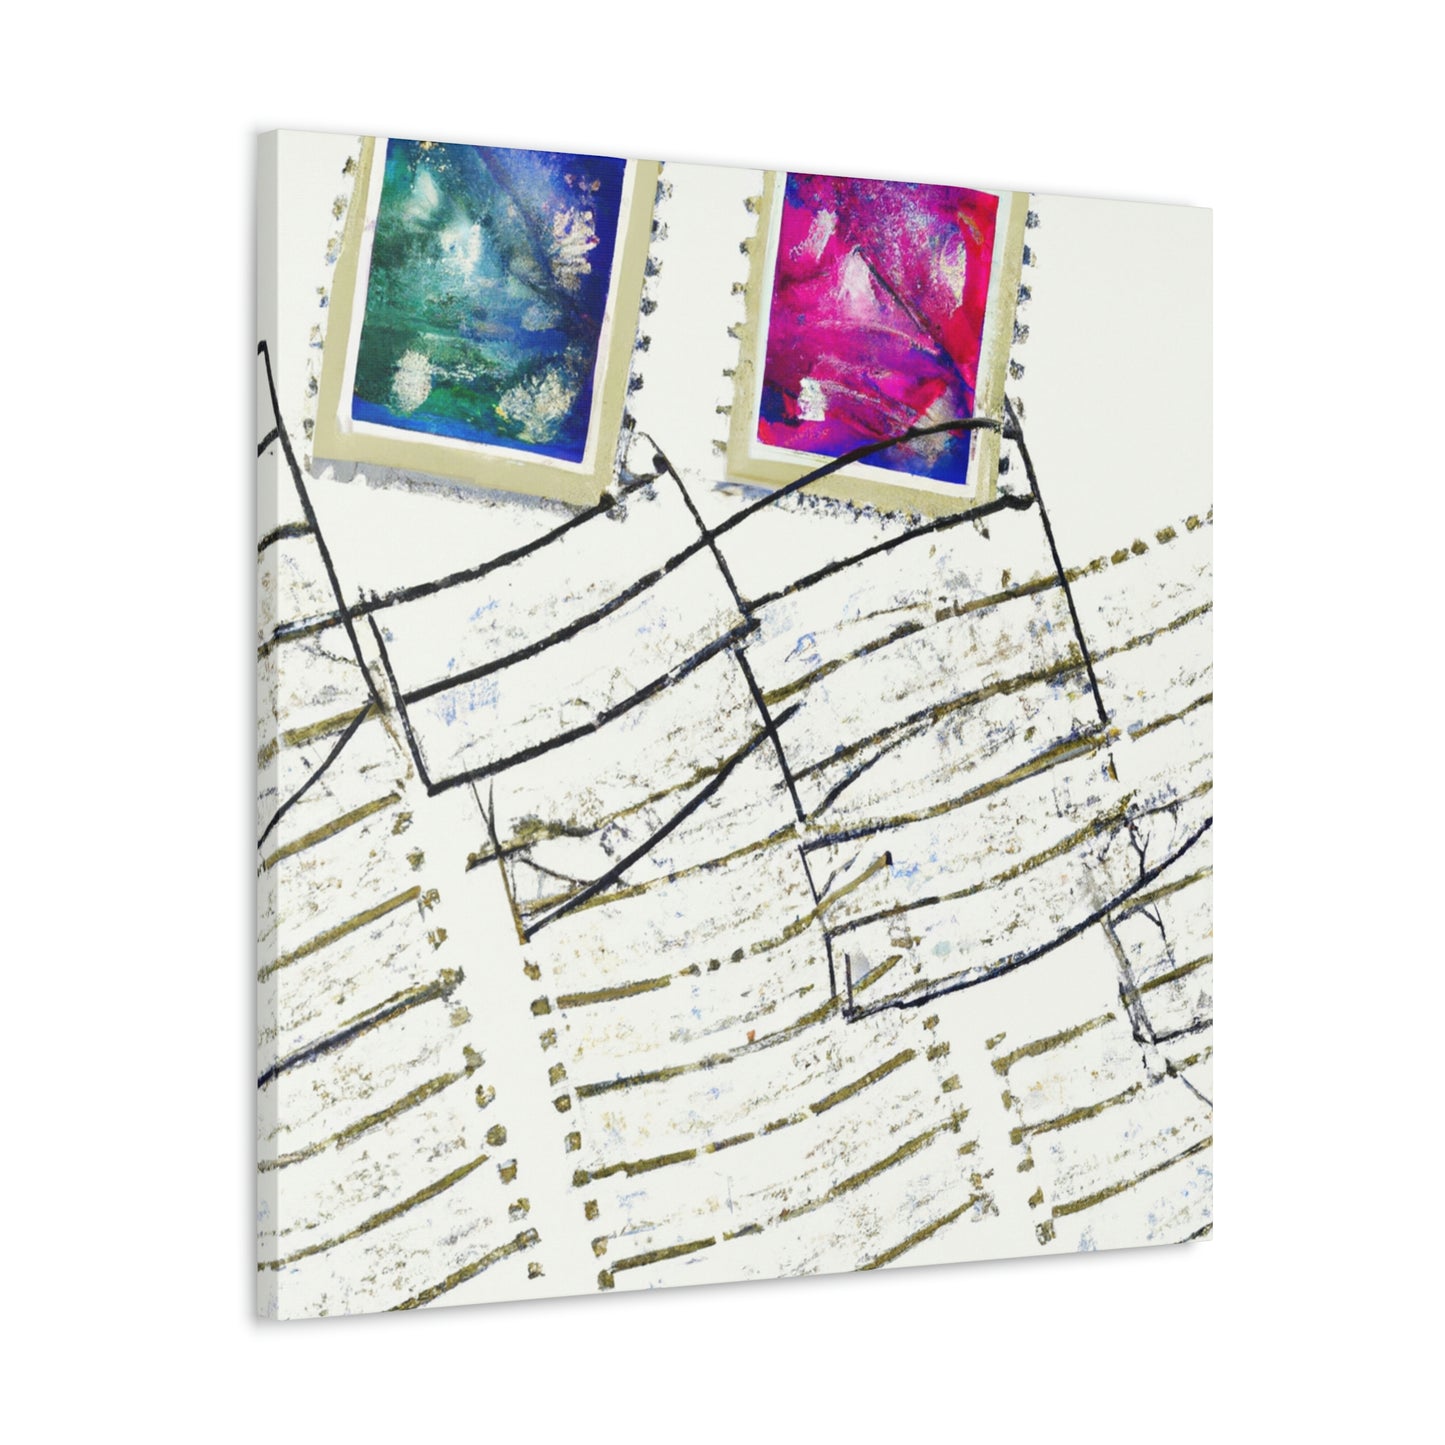 Worldly Signs: A Collection of International Postage Stamps - Canvas